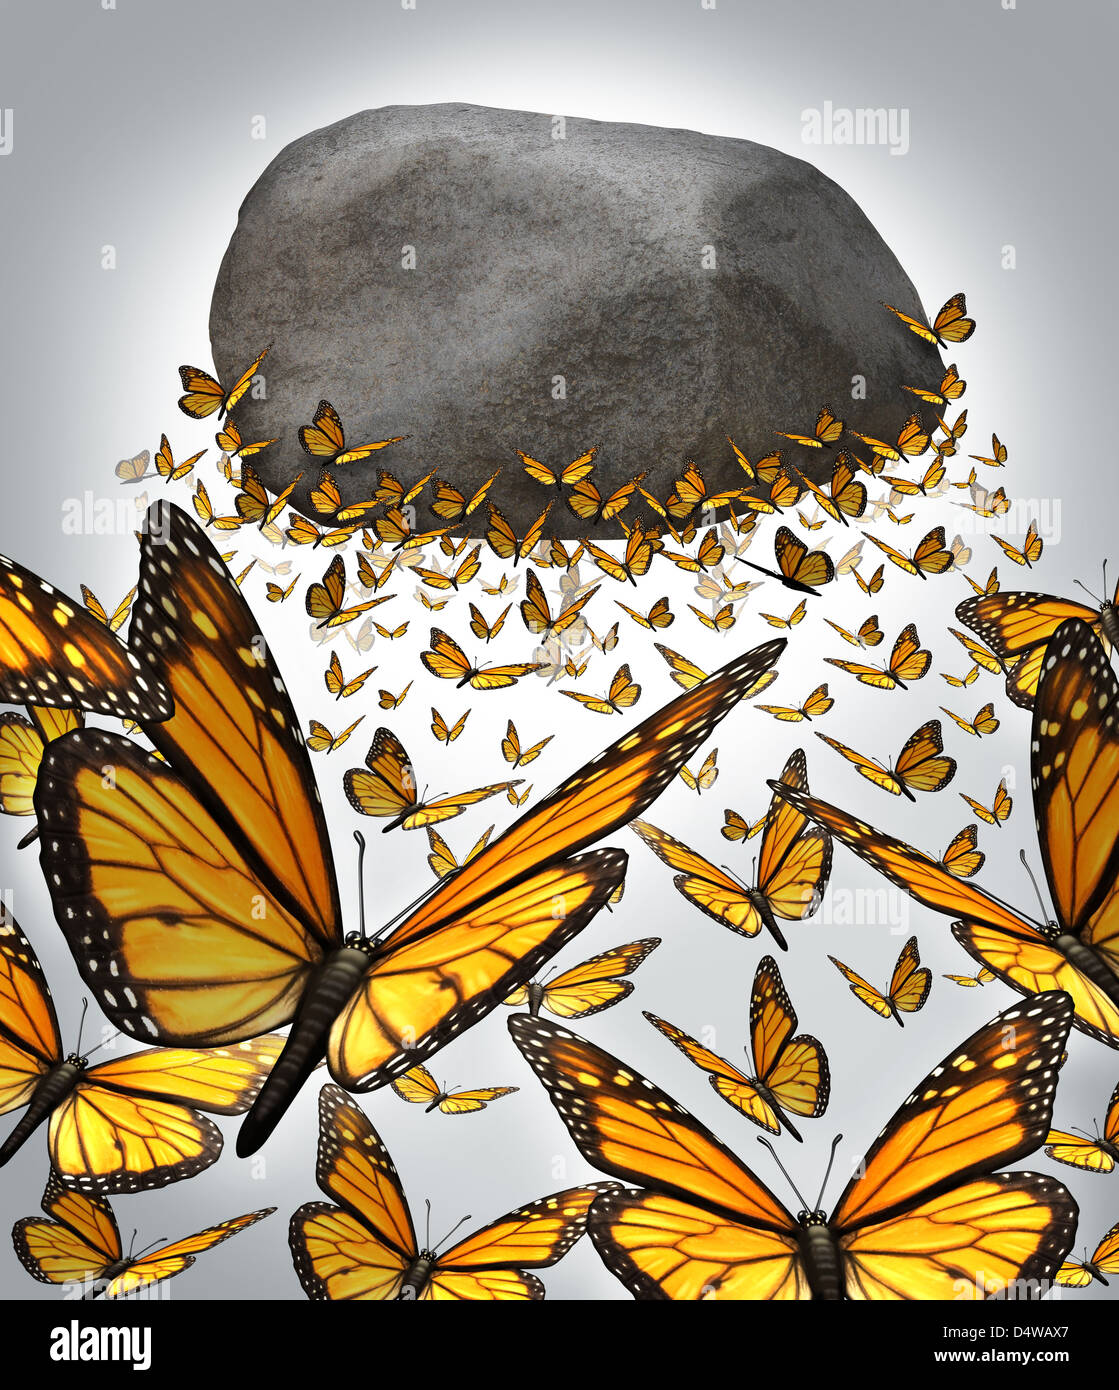 Group strength and the power of working together as a business concept with a team of monarch butterflies forming a solid organised partnership to overcome the challenge of lifting a heavy rock boulder up in the air. Stock Photo